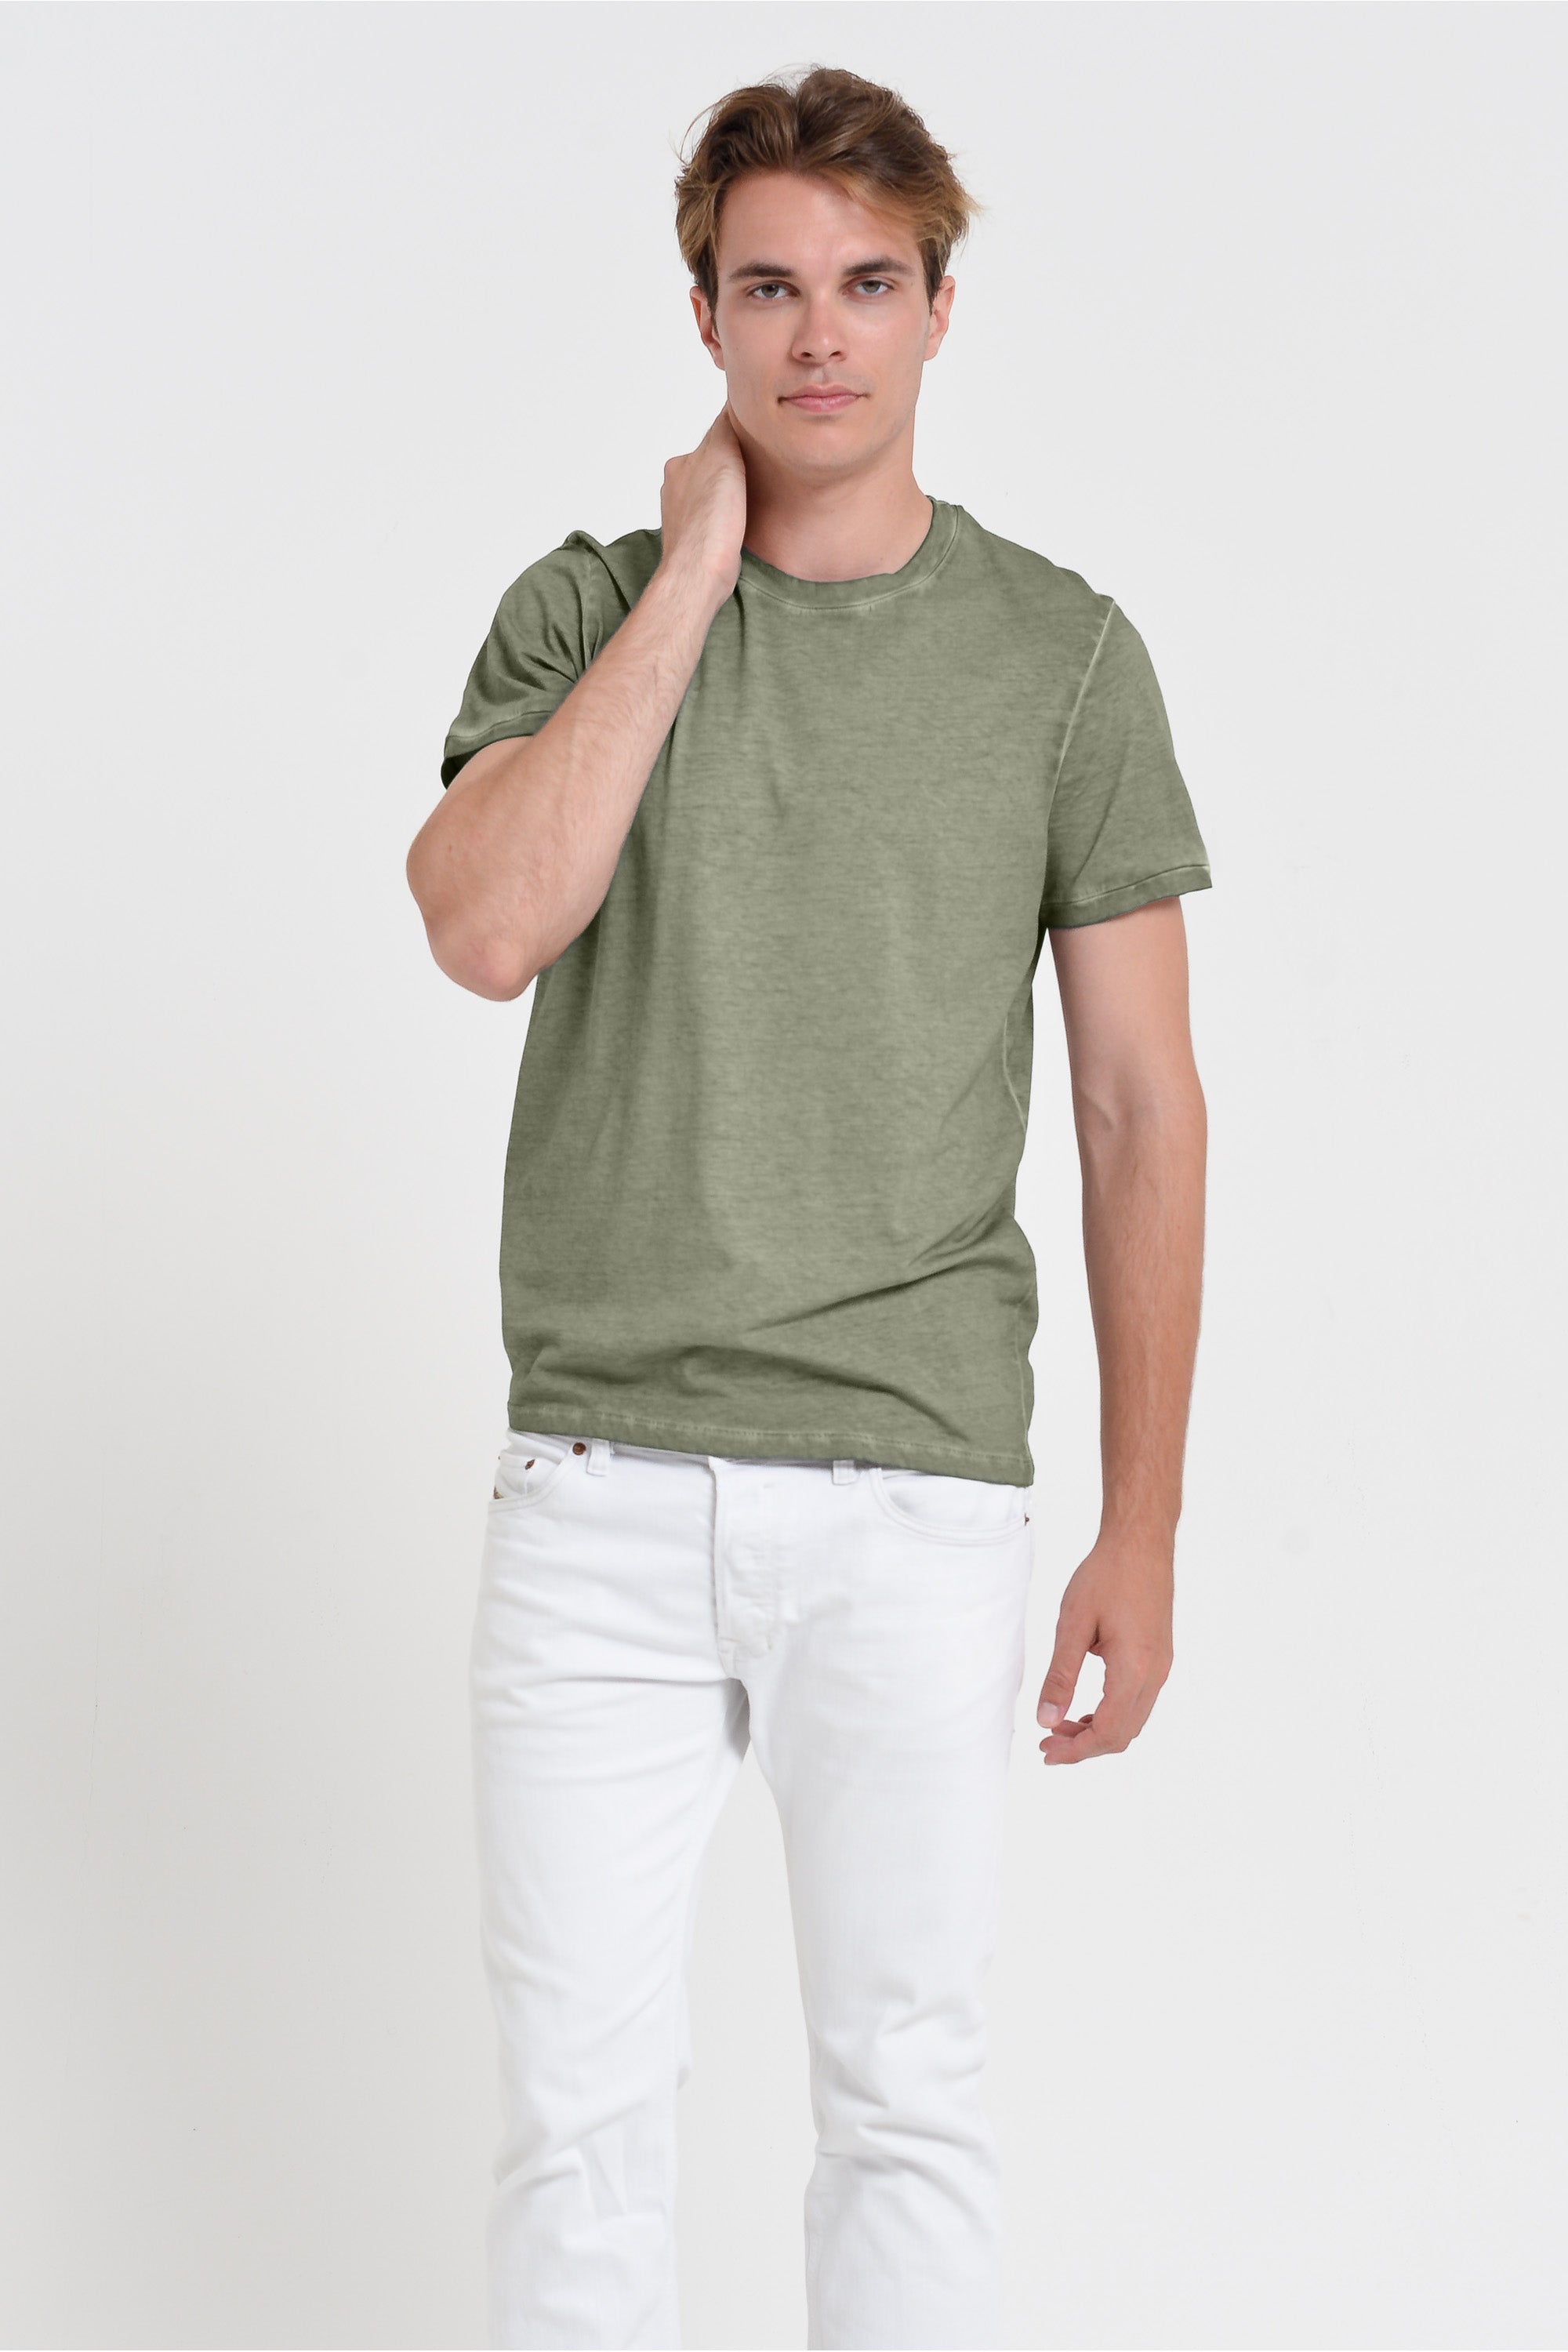 Smart Casual Cotton T-Shirt - Willy's